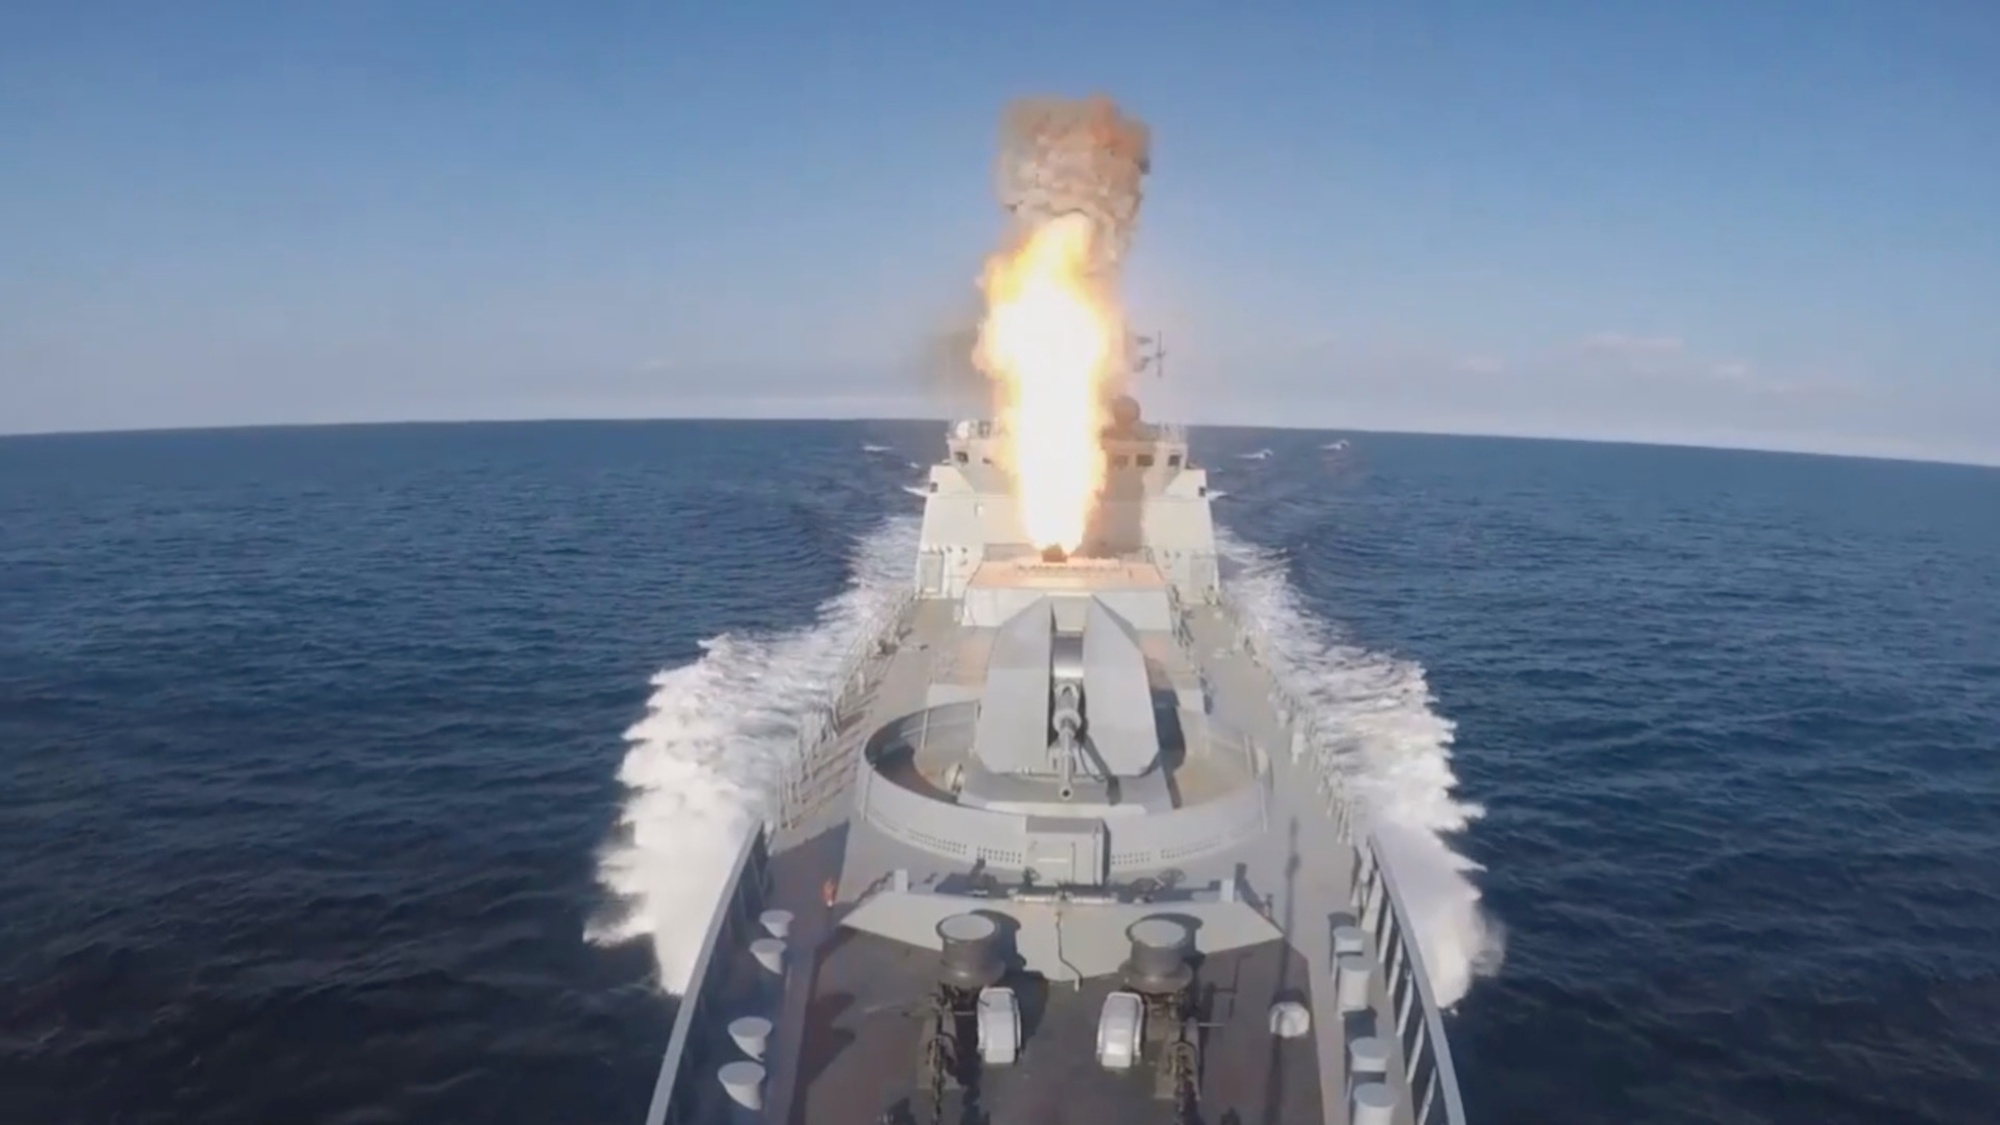 Read more about the article WAR IN UKRAINE: Russian Frigate Hurtling Through Black Sea Launches Salvo Of Missiles